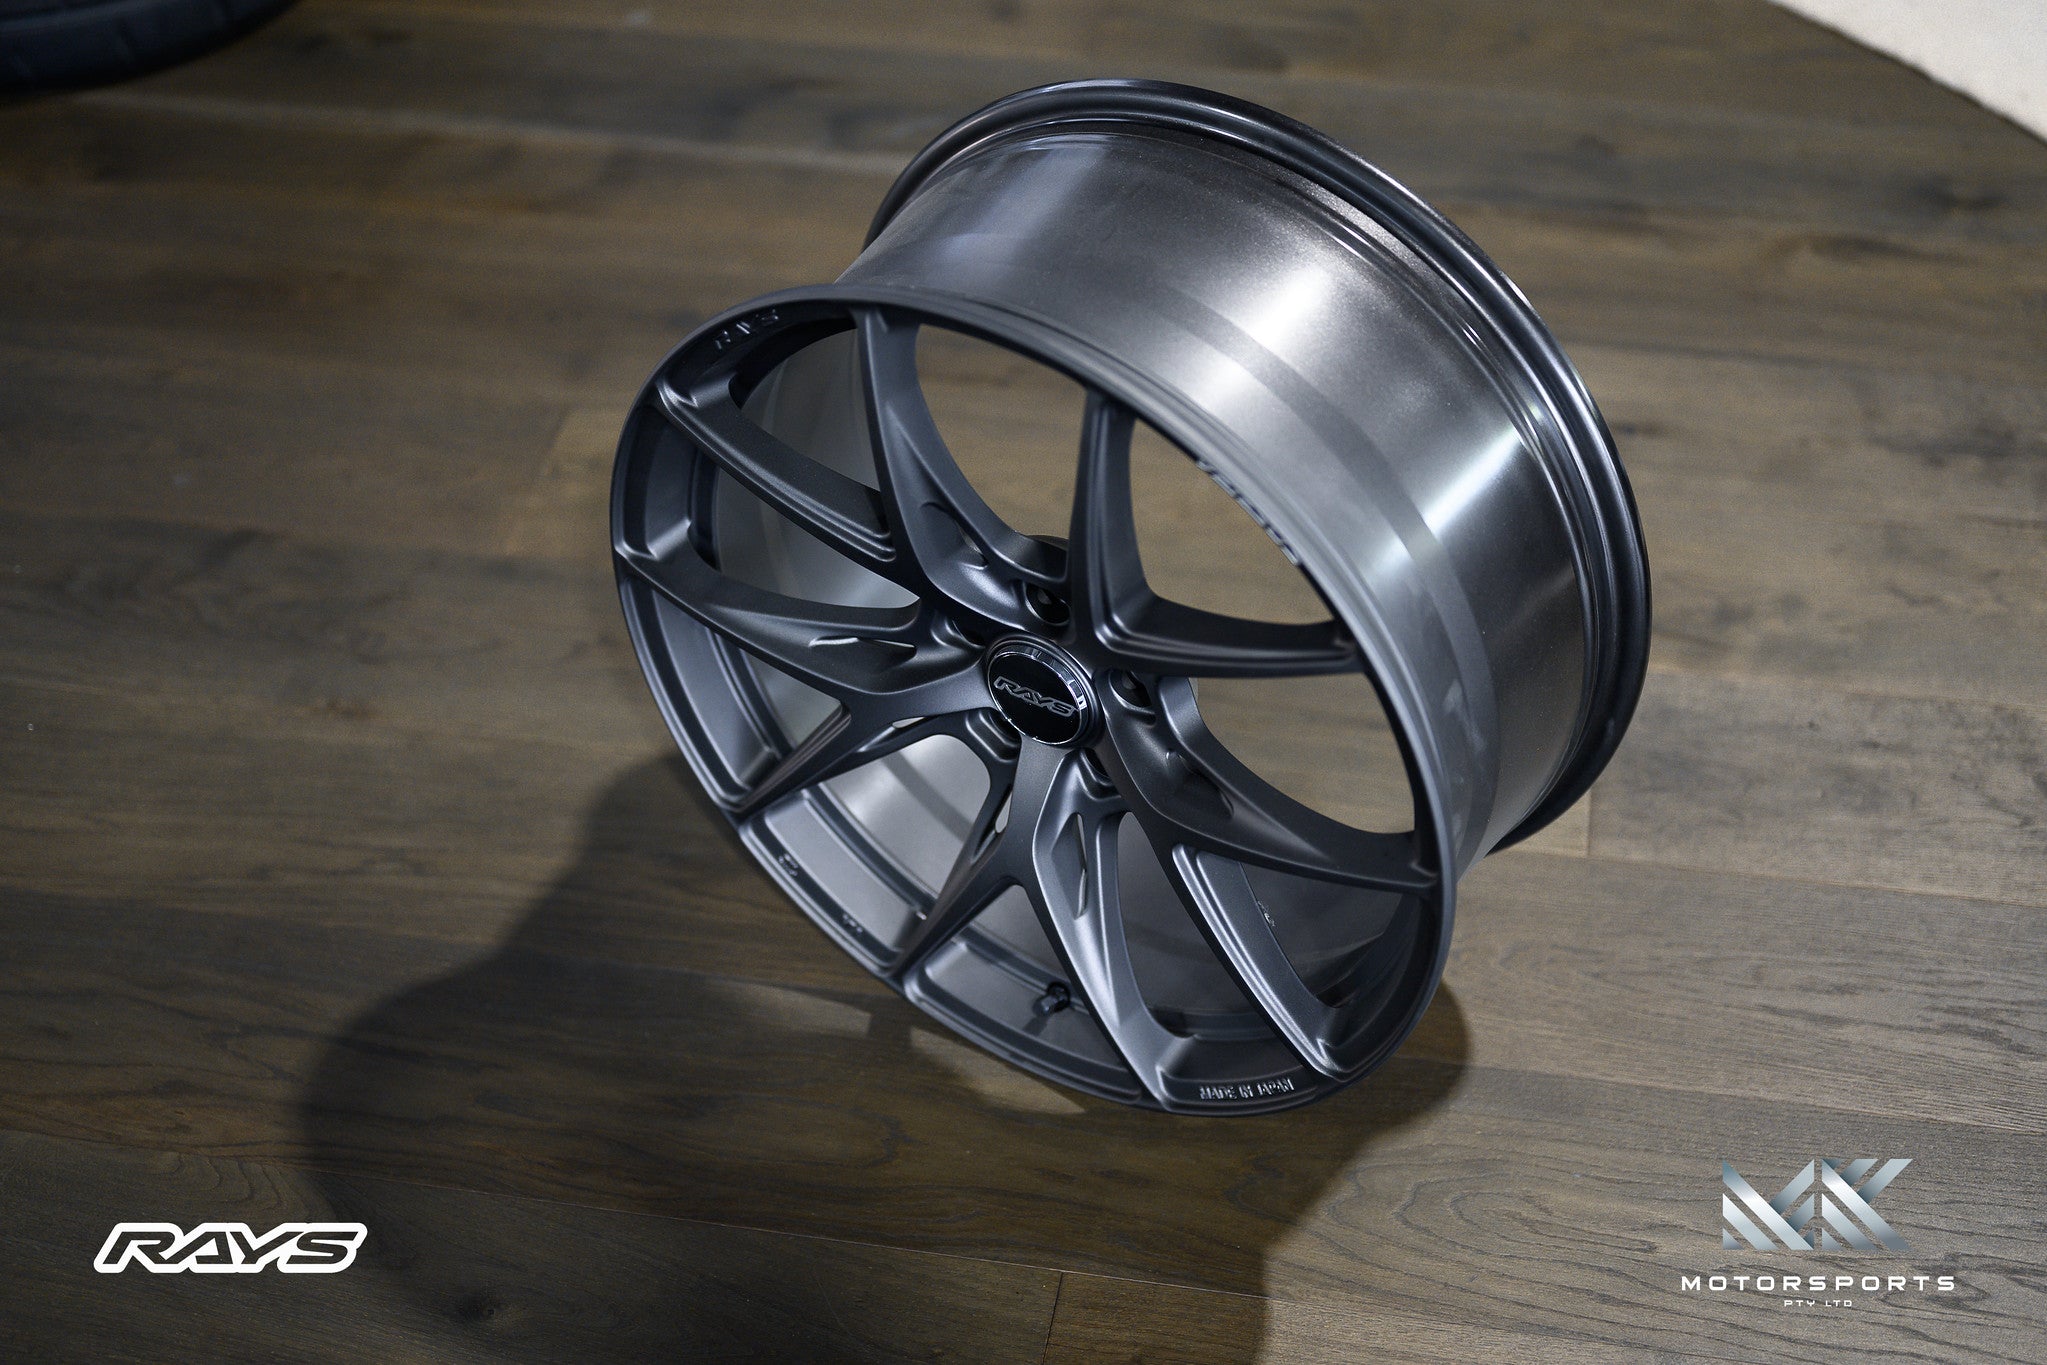 Versus VV21S - Premium Wheels from VERSUS - From just $2290.00! Shop now at MK MOTORSPORTS